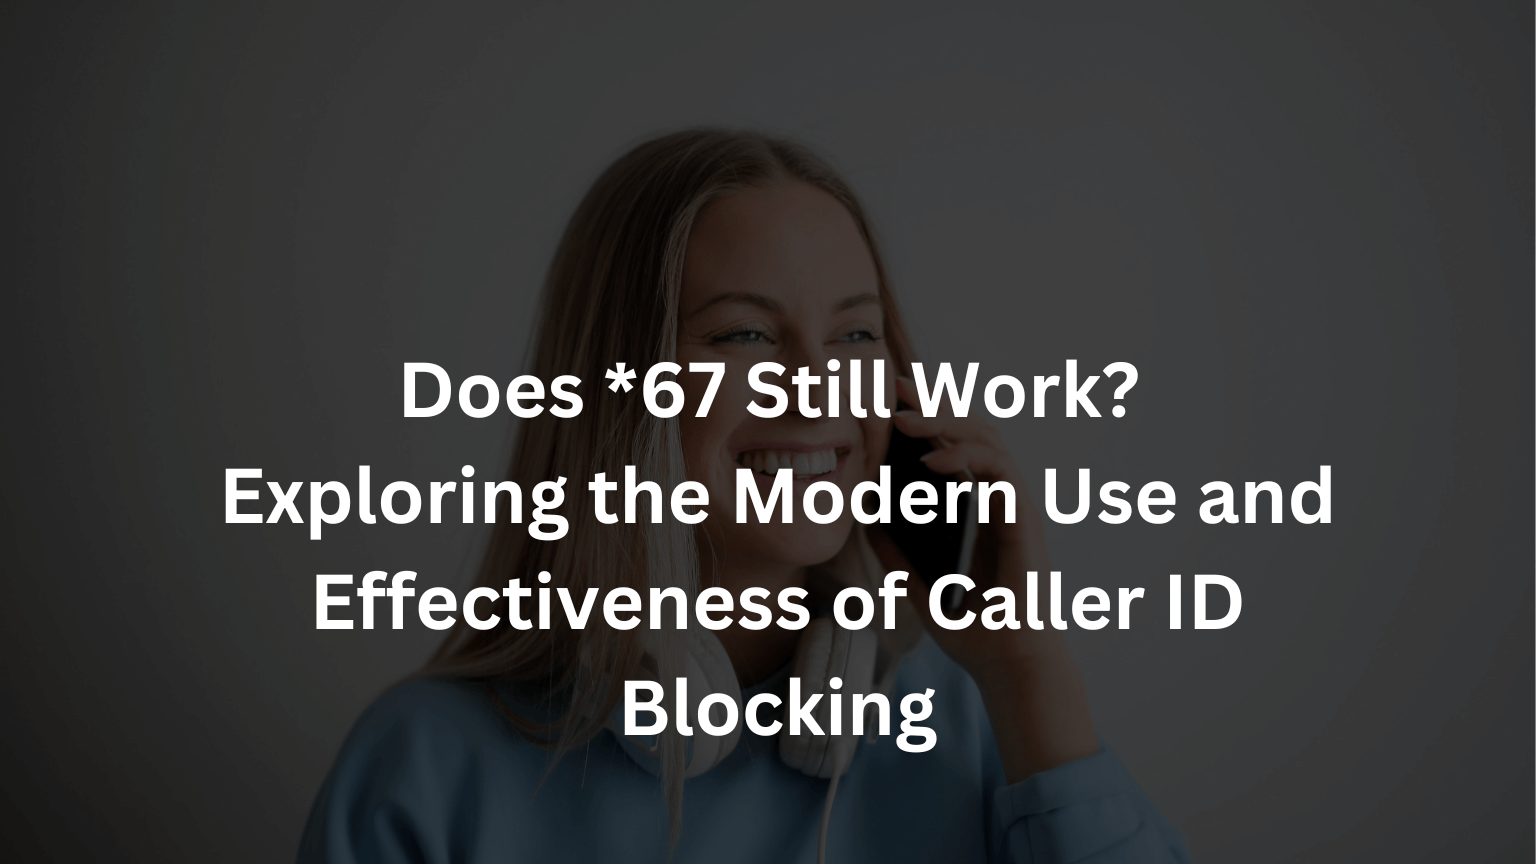 Does *67 Still Work? Exploring the Modern Use and Effectiveness of Caller ID Blocking